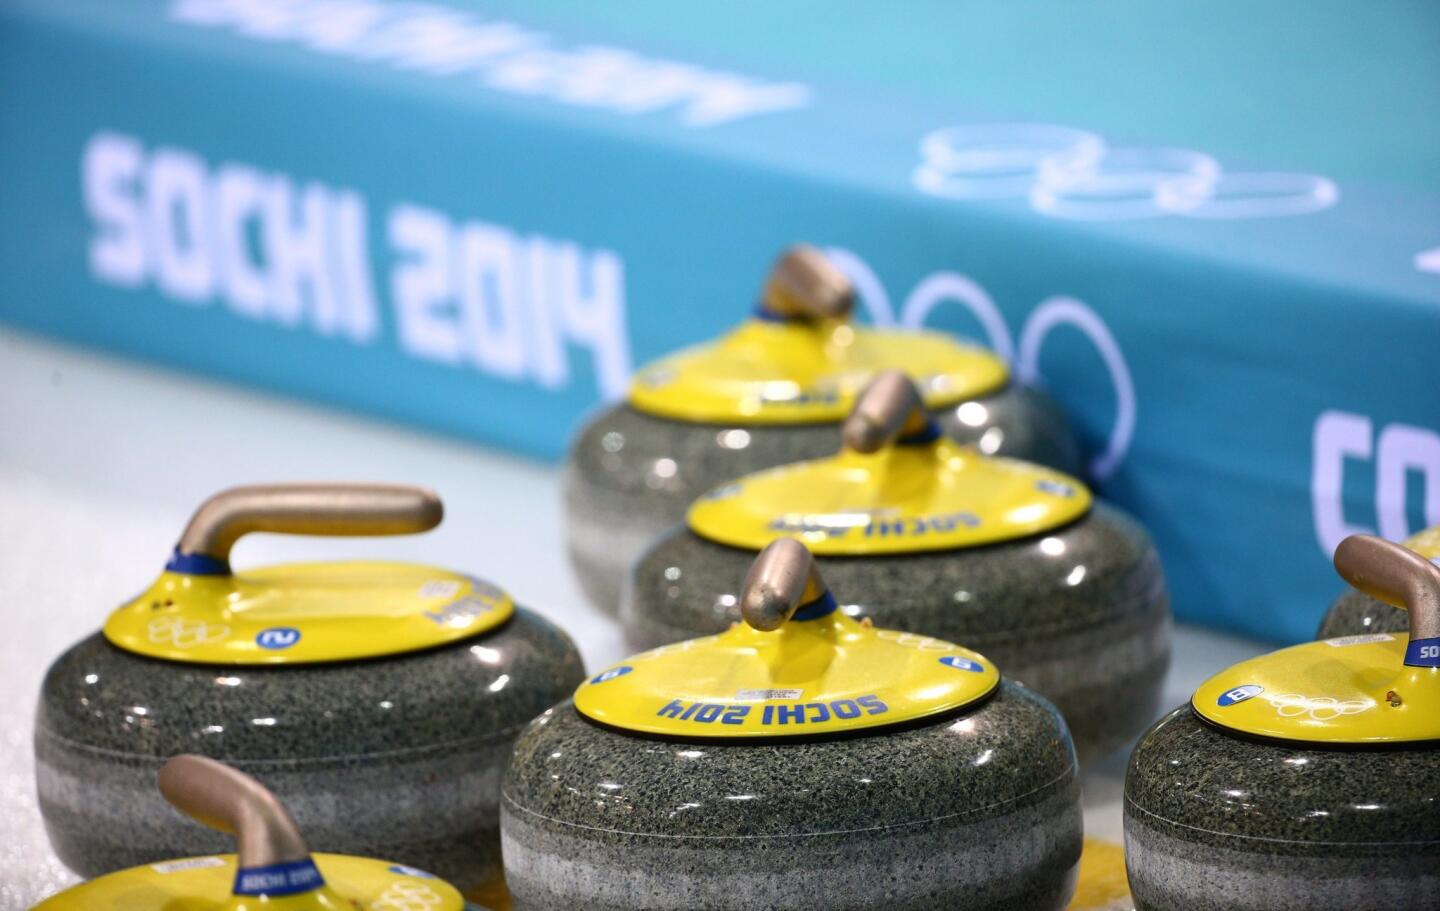 Curling stones used in a round-robin match Monday between Germany and Canada during the curling tournament at the Olympic Games in Sochi, Russia.